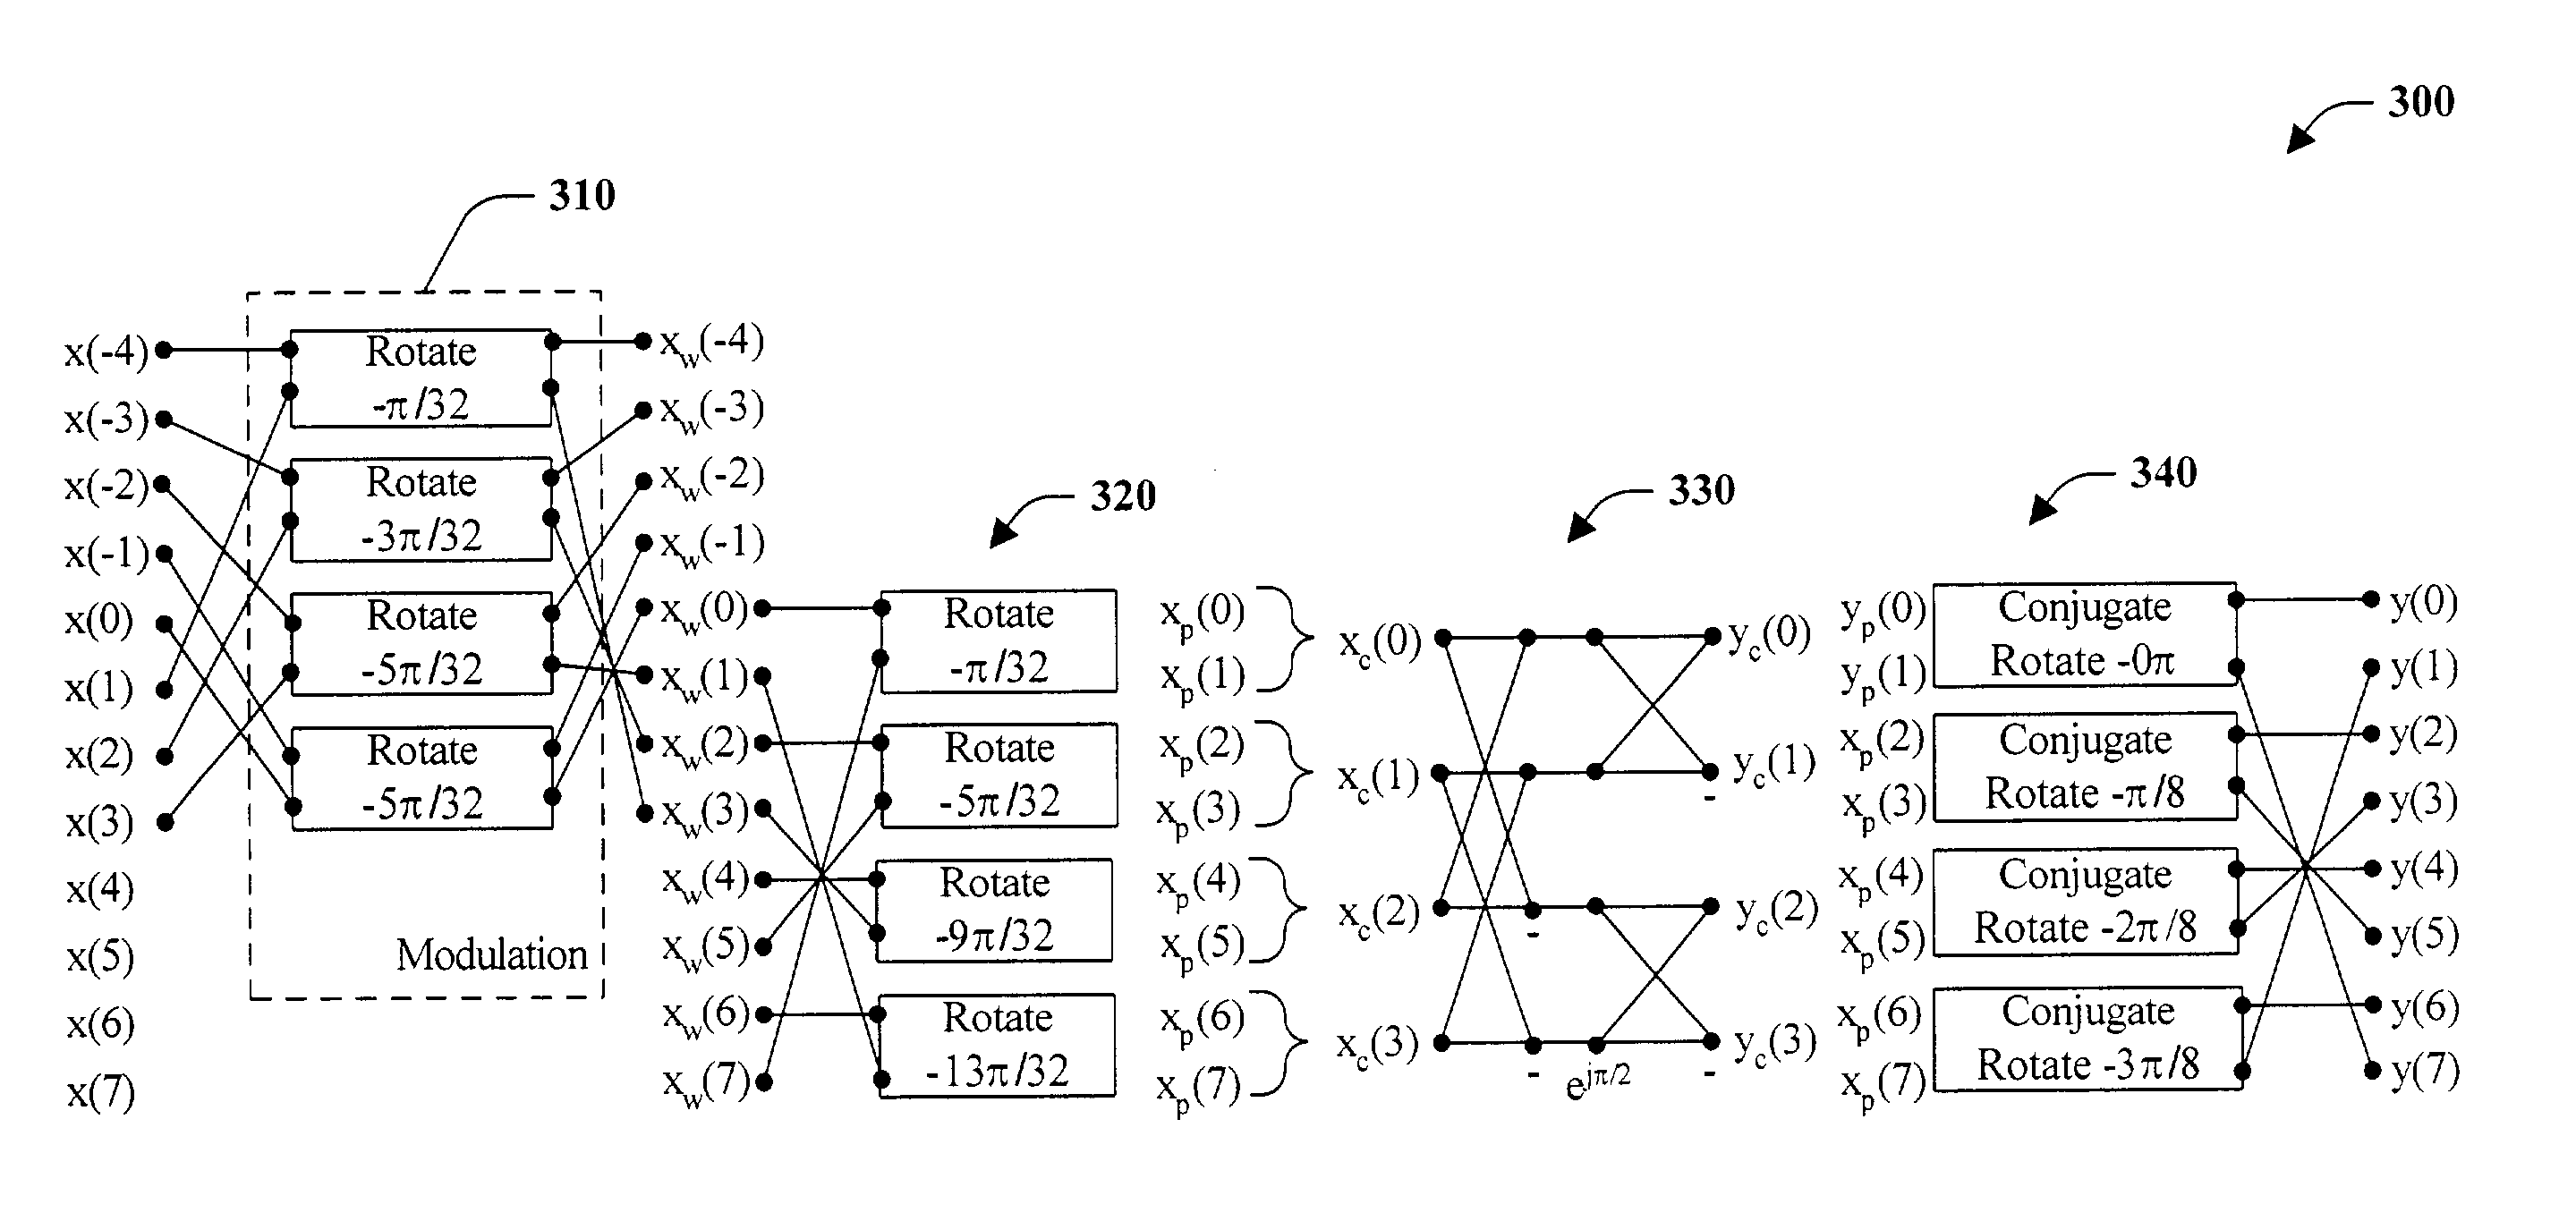 Progressive to lossless embedded audio coder (PLEAC) with multiple factorization reversible transform